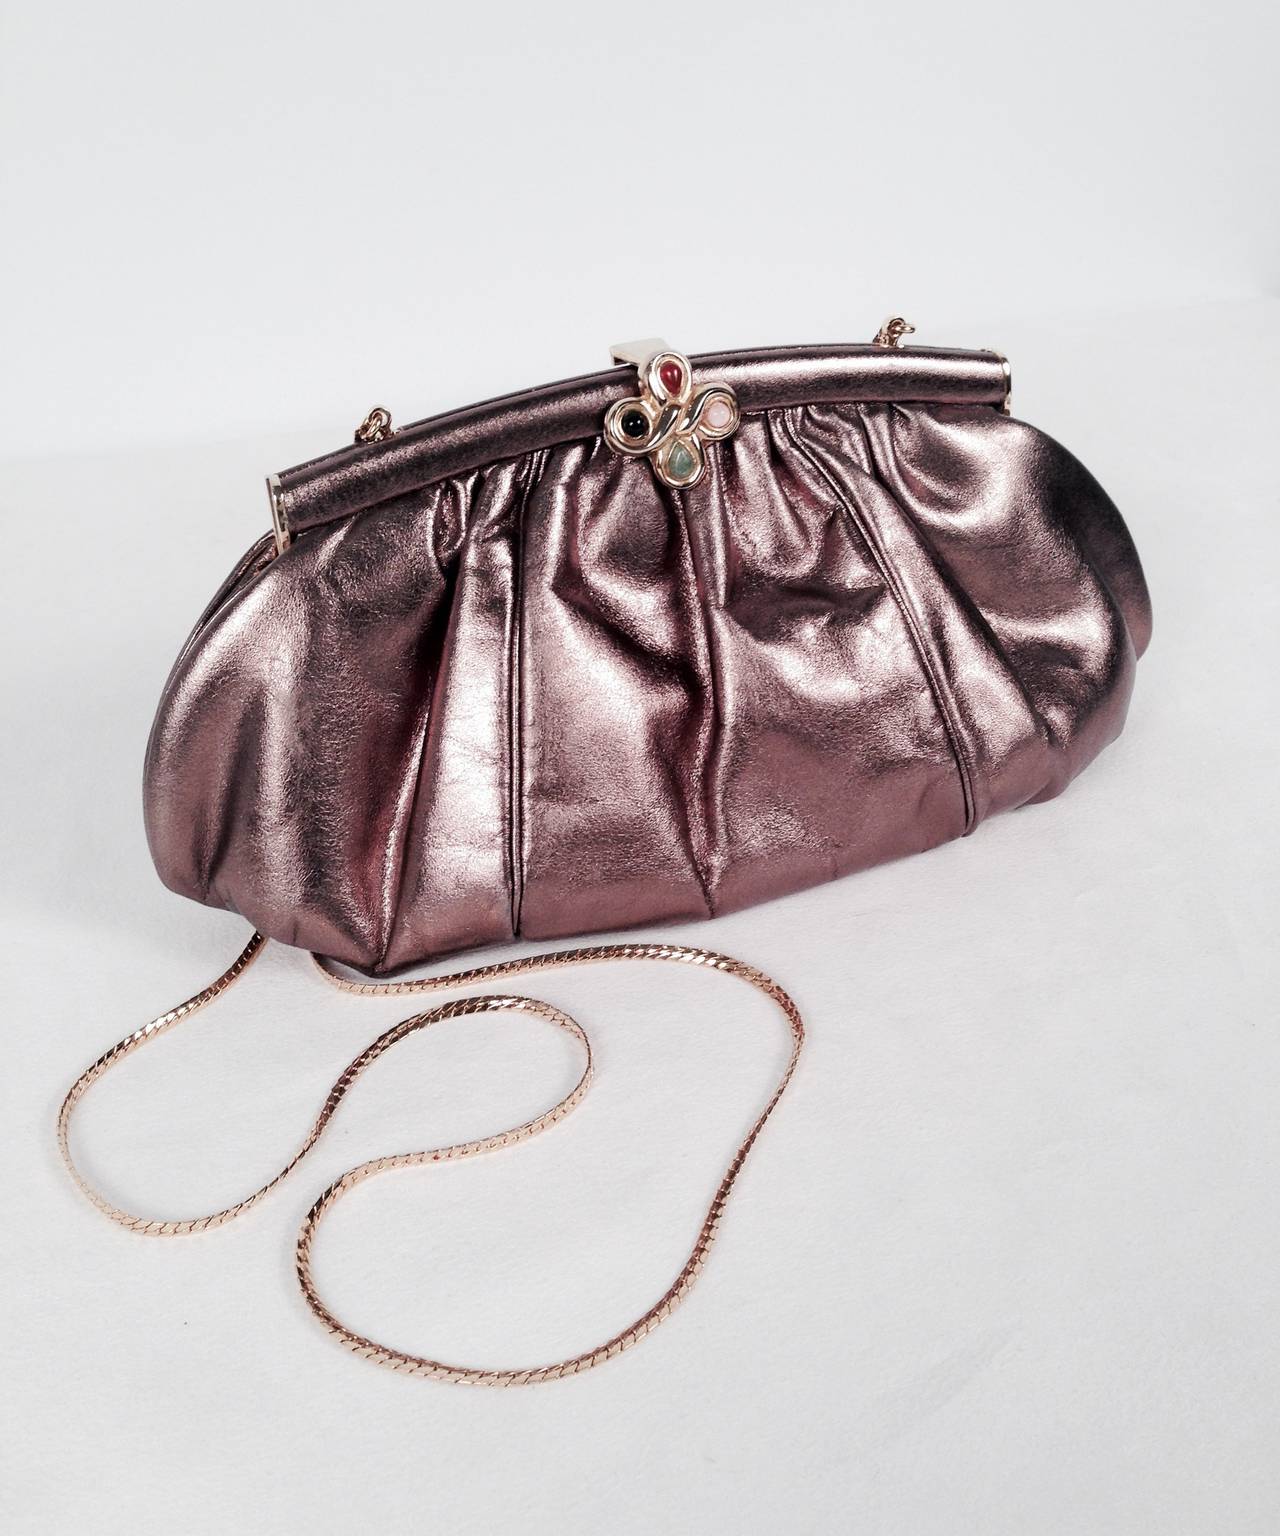 Vintage Metallic Leather Evening Bag With Jeweled Clasp is highly desired by all collectors of Judith Leiber!  Features butter-soft iridescent leather that is slightly gathered and changes from pink to bronze to gold in different light.  Converts